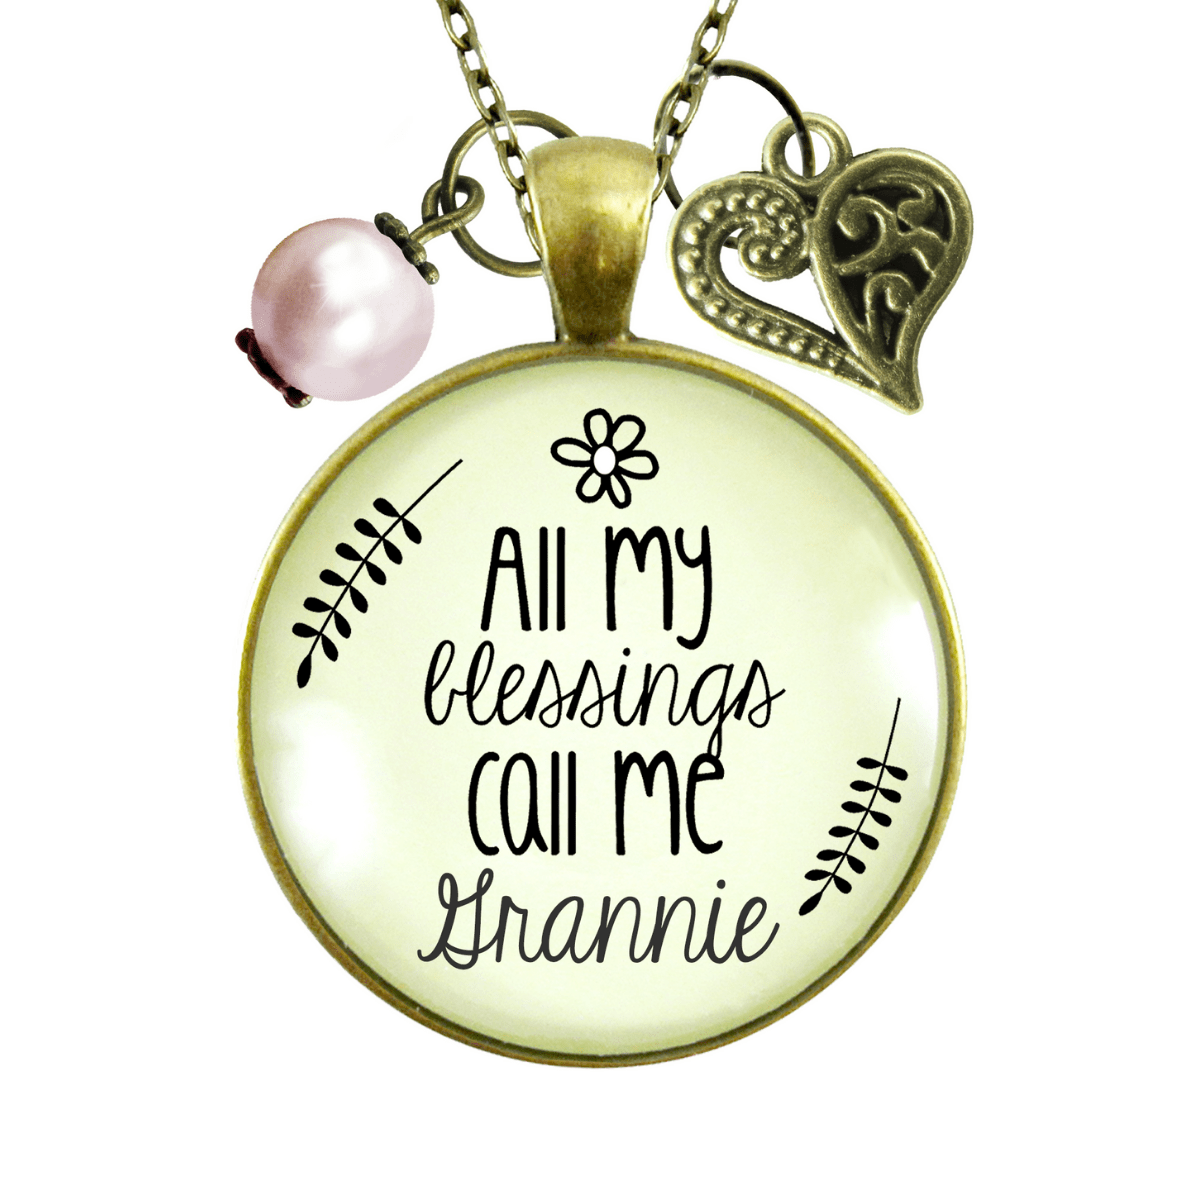 Gutsy Goodness Grannie Necklace All My Blessings Meaningful Grandma Womens Family Gift Jewelry - Gutsy Goodness Handmade Jewelry;Grannie Necklace All My Blessings Meaningful Grandma Womens Family Gift Jewelry - Gutsy Goodness Handmade Jewelry Gifts